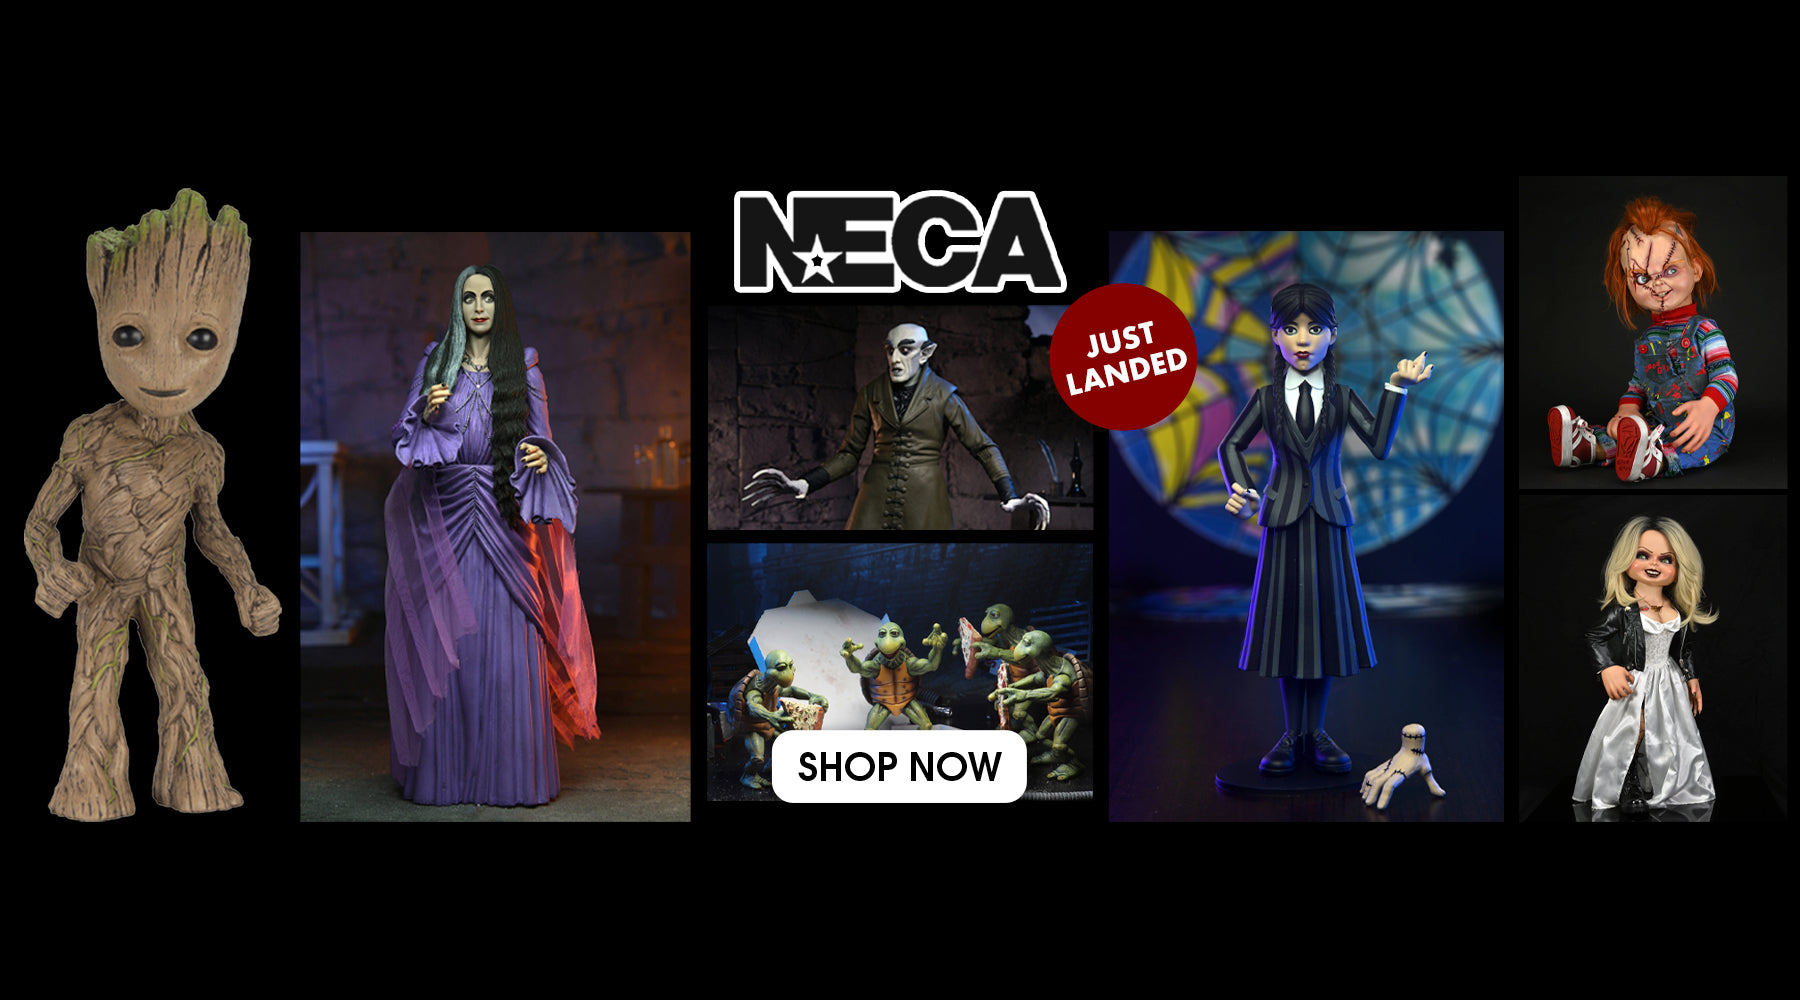 New NECA have just landed. From lifesize Deadpool, Chucky and Tiffany to new TMNT, Wednesday and Nosferatu, check out the new additions to our NECA collection online at Costume Super Centre Australia